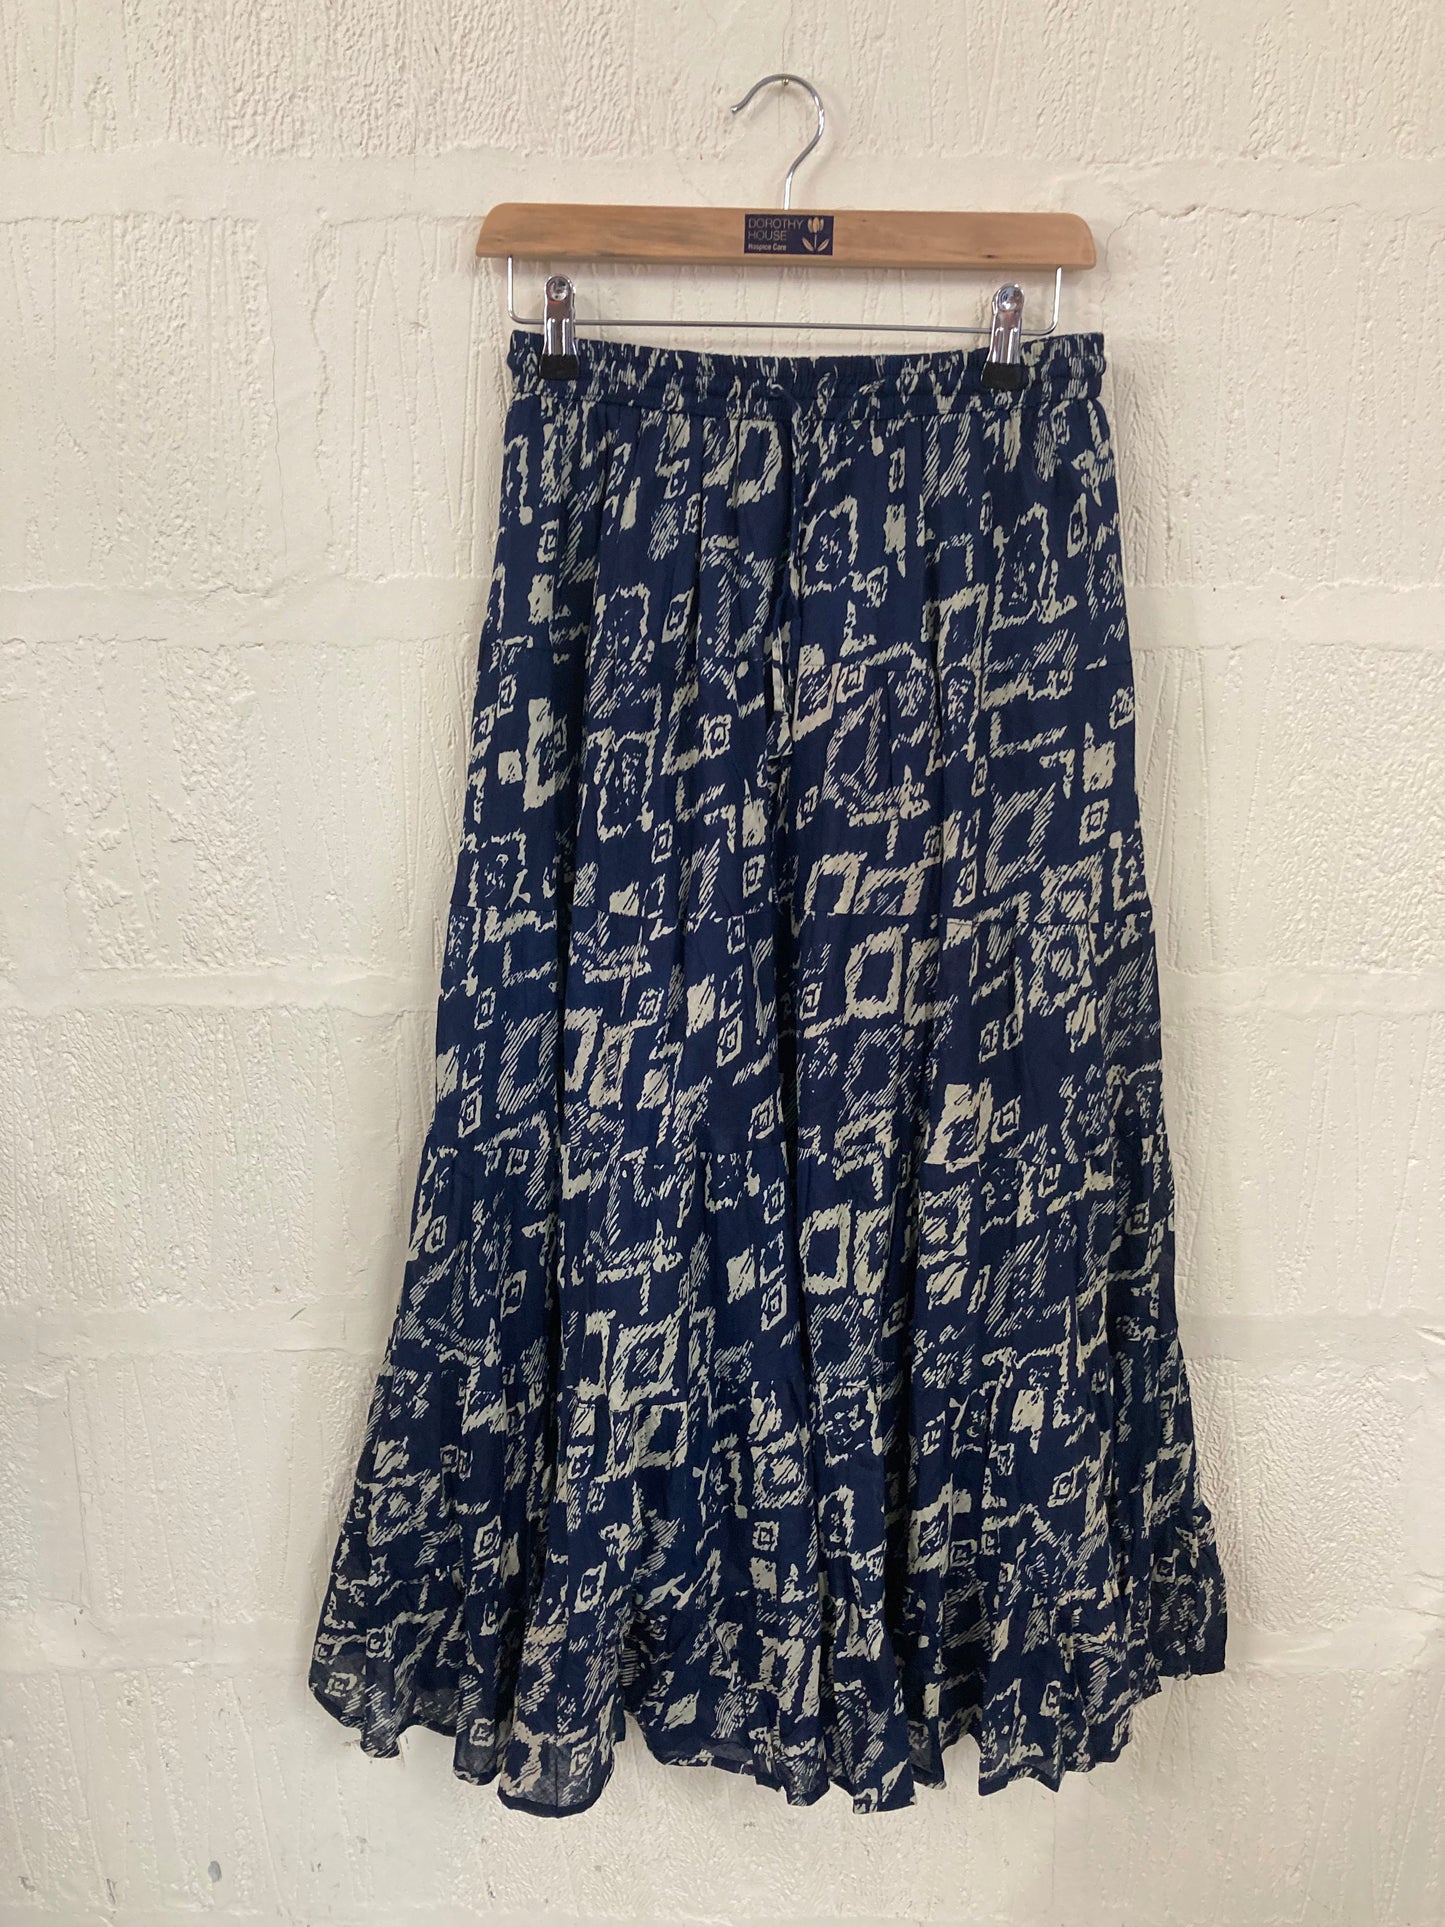 Vintage Navy and White Ikat Pattern Skirt 8